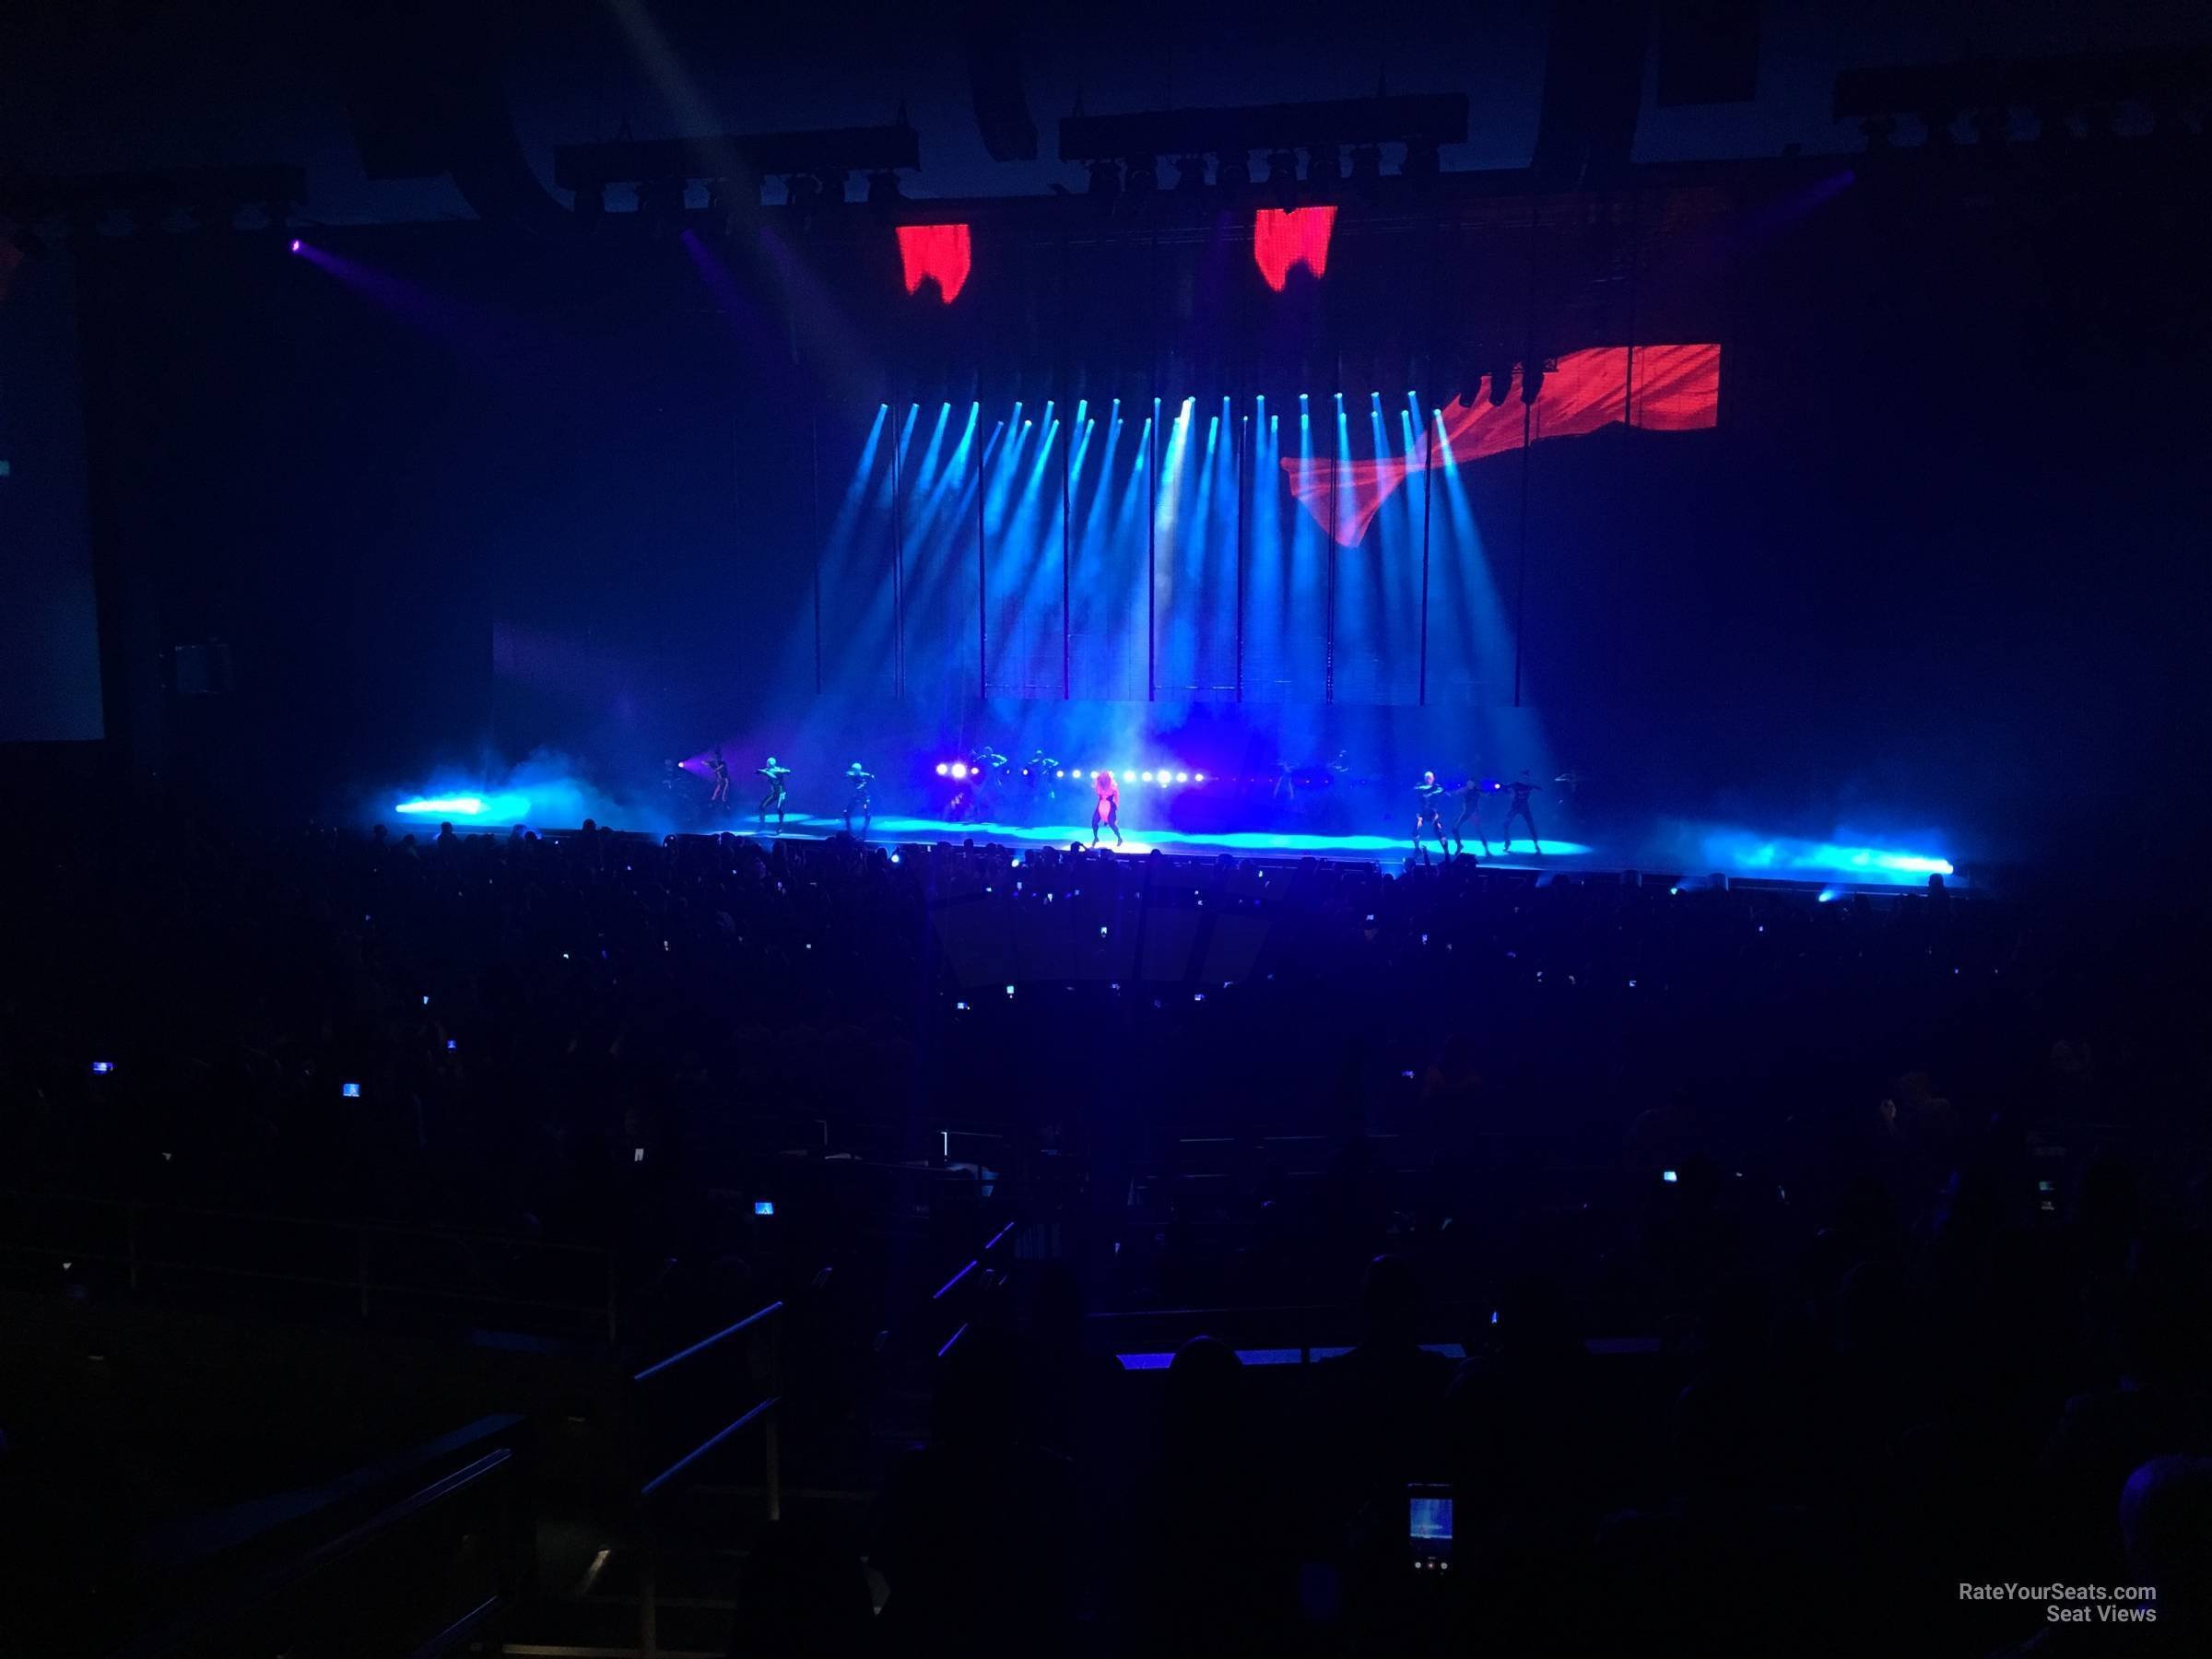 section 303, row g seat view  - dolby live at park mgm